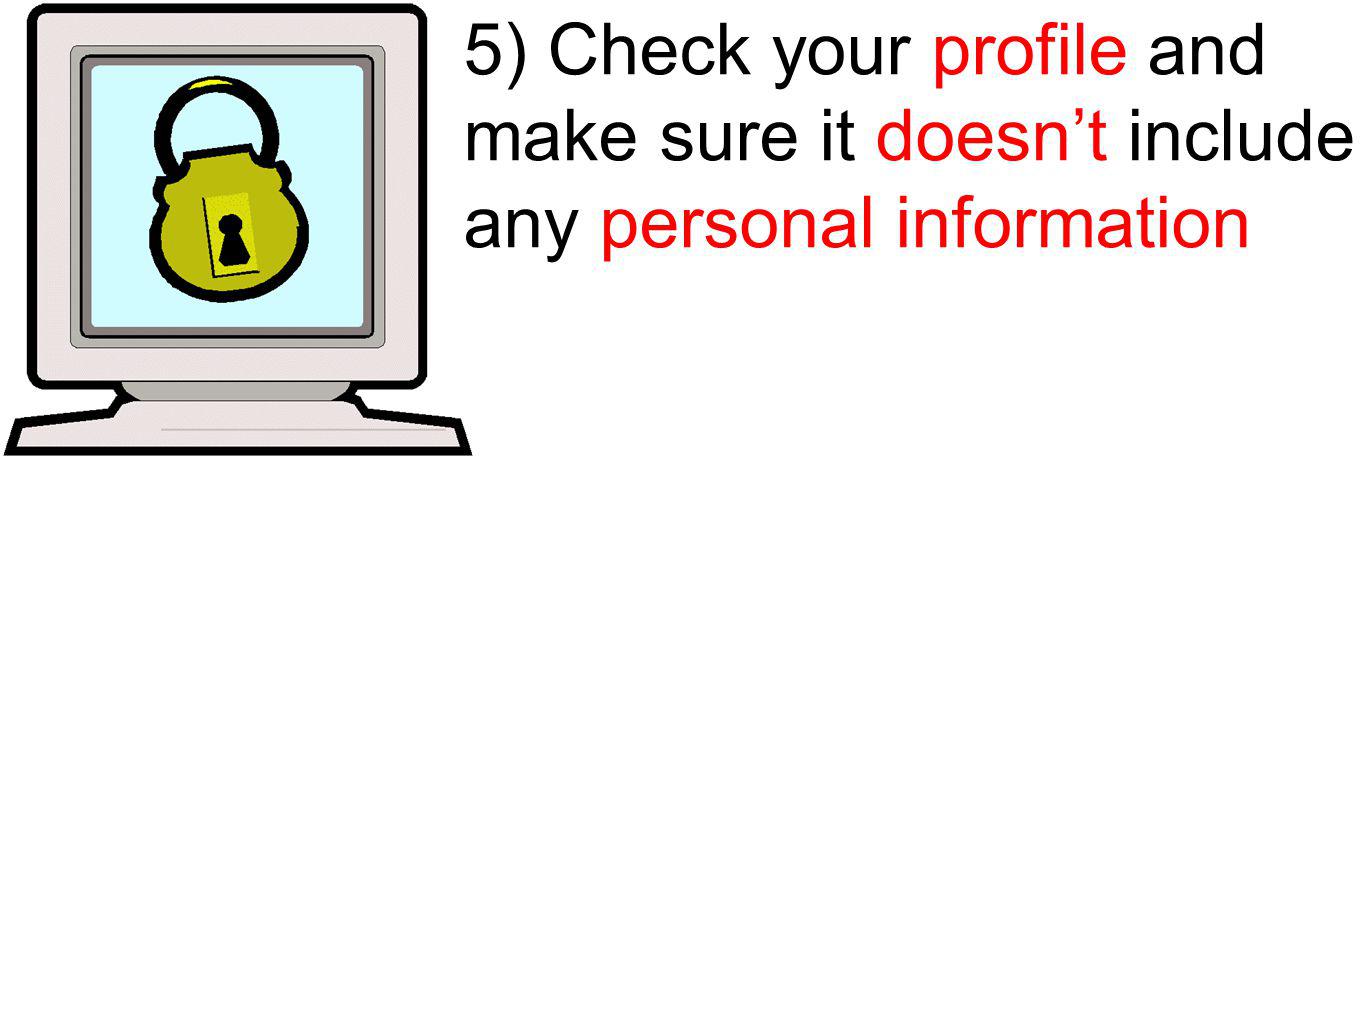 5) Check your profile and make sure it doesnt include any personal information